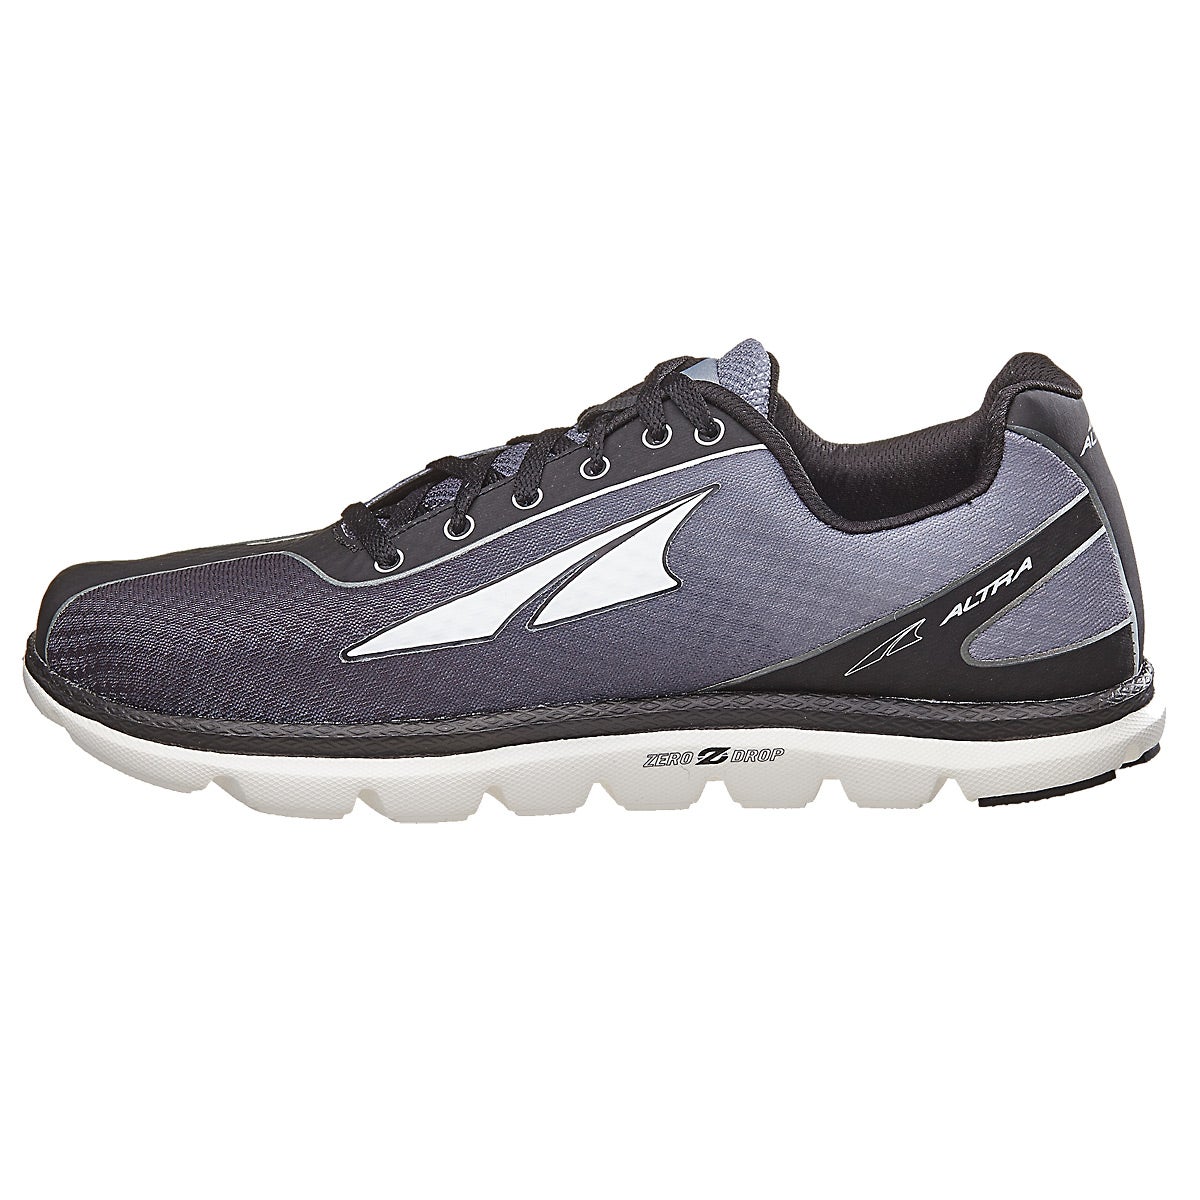  Altra One 2 5  Men s Shoes Black 360  View Running Warehouse